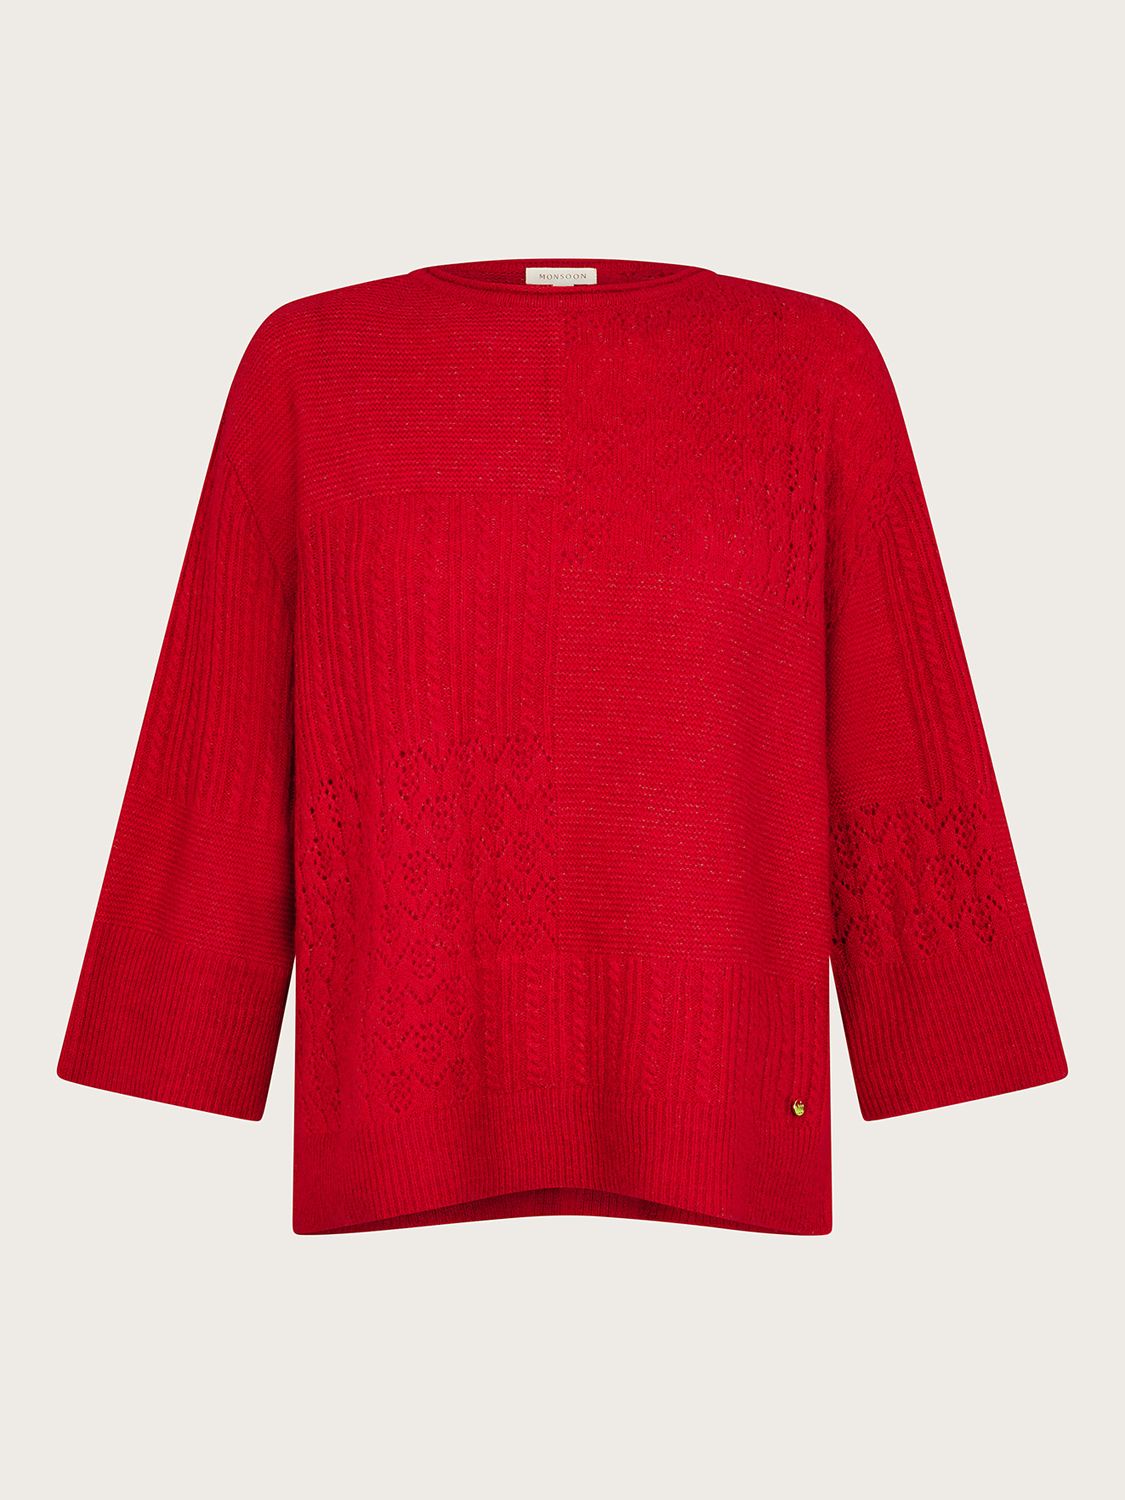 Buy Monsoon San Supersoft Mixed Texture Jumper Online at johnlewis.com